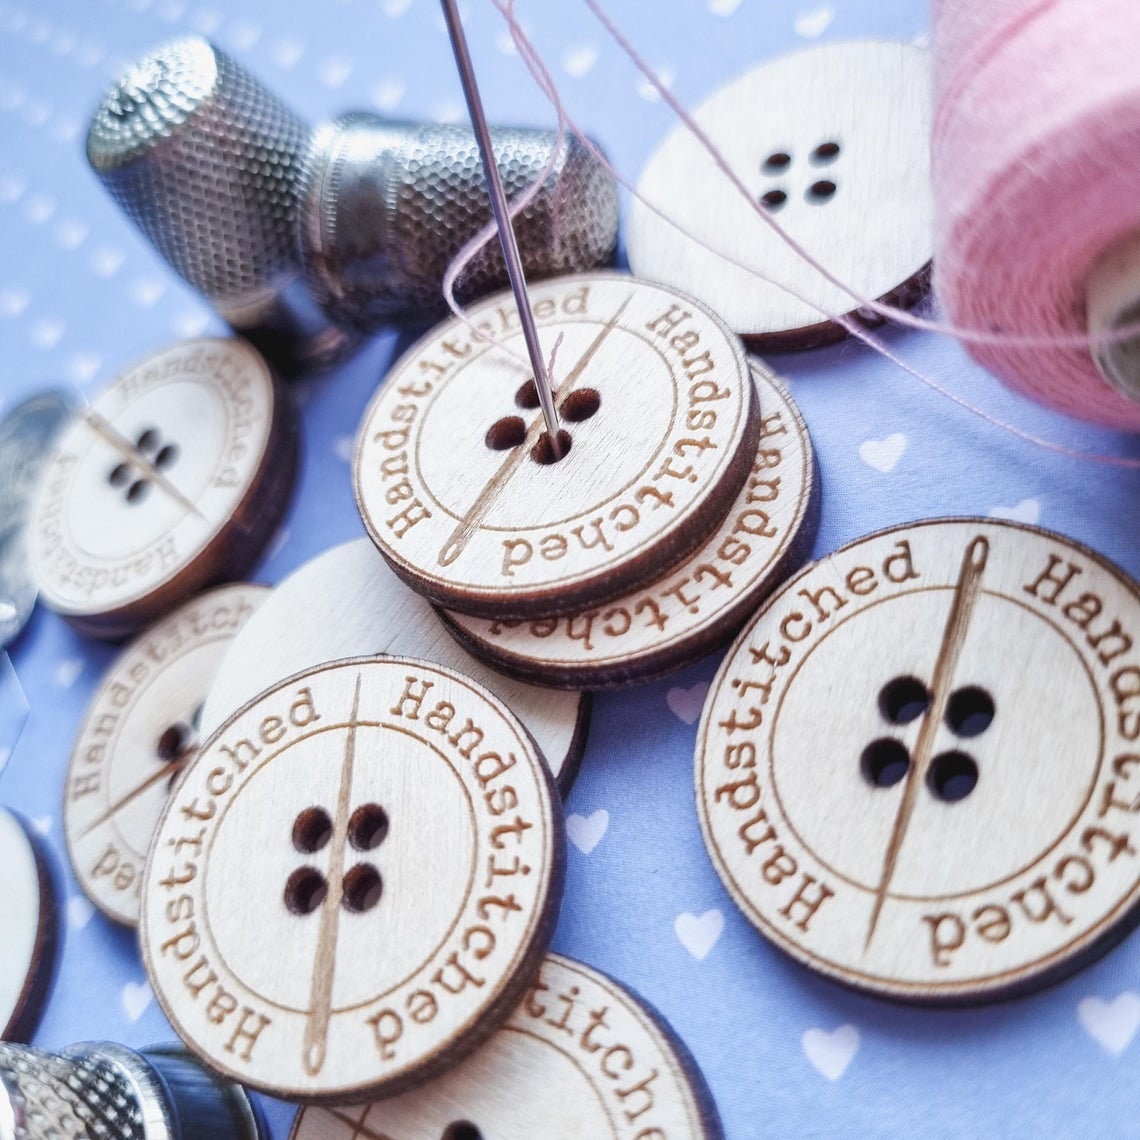 Wooden Heart Shaped Buttons for Crafts Laser Cut Wooden Buttons